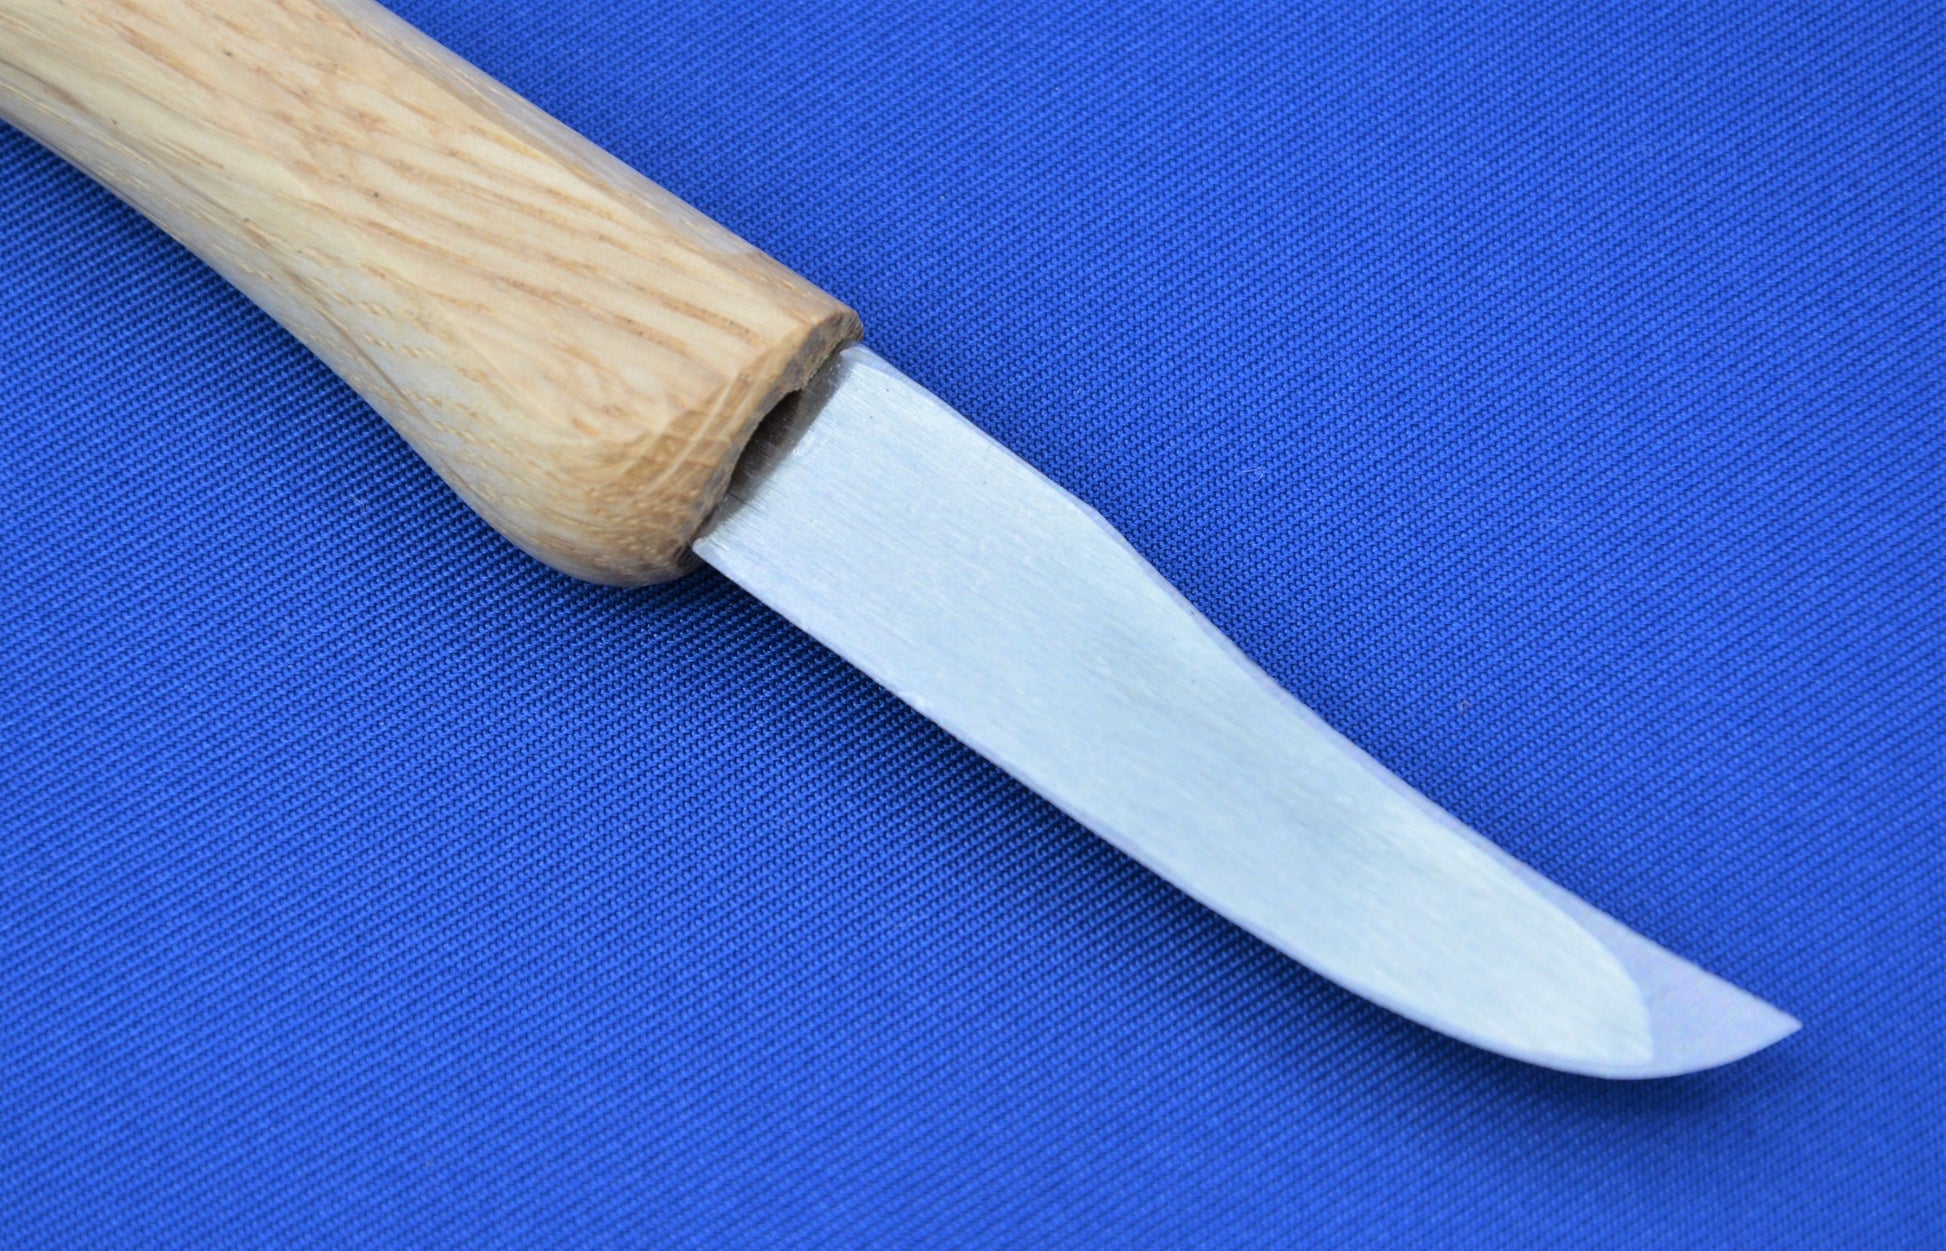 Wood Carving Knife - Clip Point Left